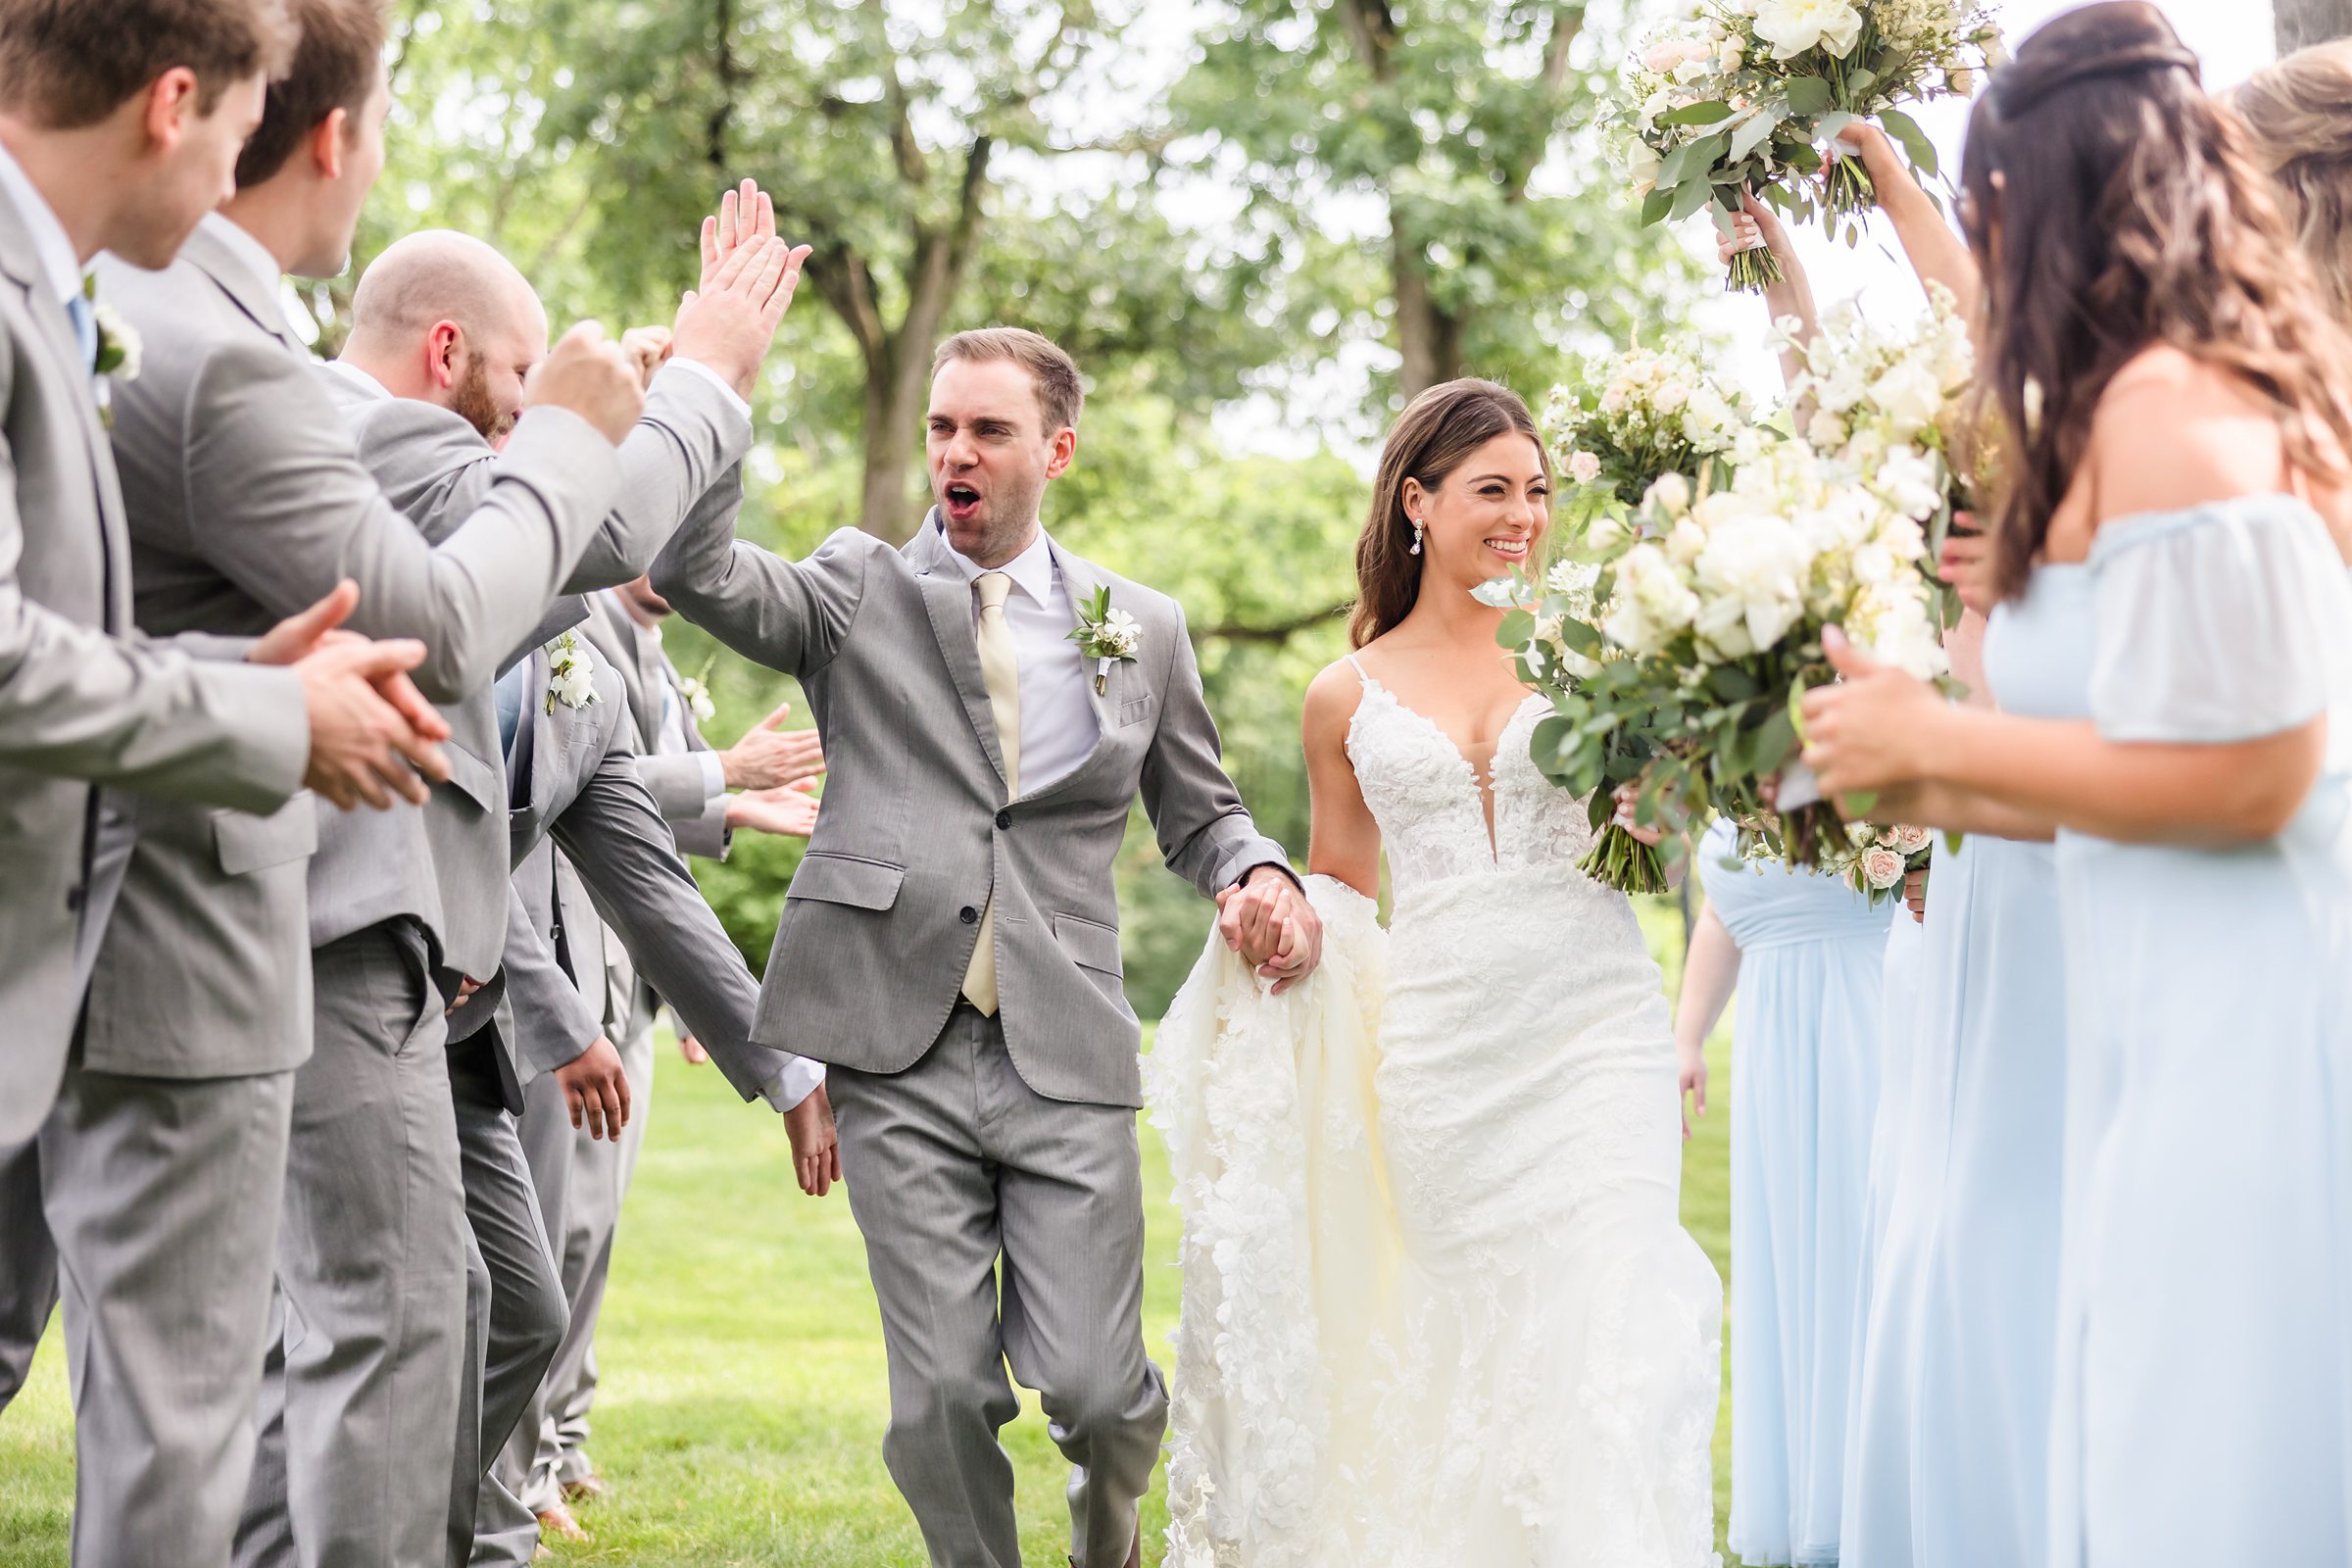 Bride & Groom celebrate their wedding with their bridal party at the Monte Bello Estate in Lemont, Illinois.